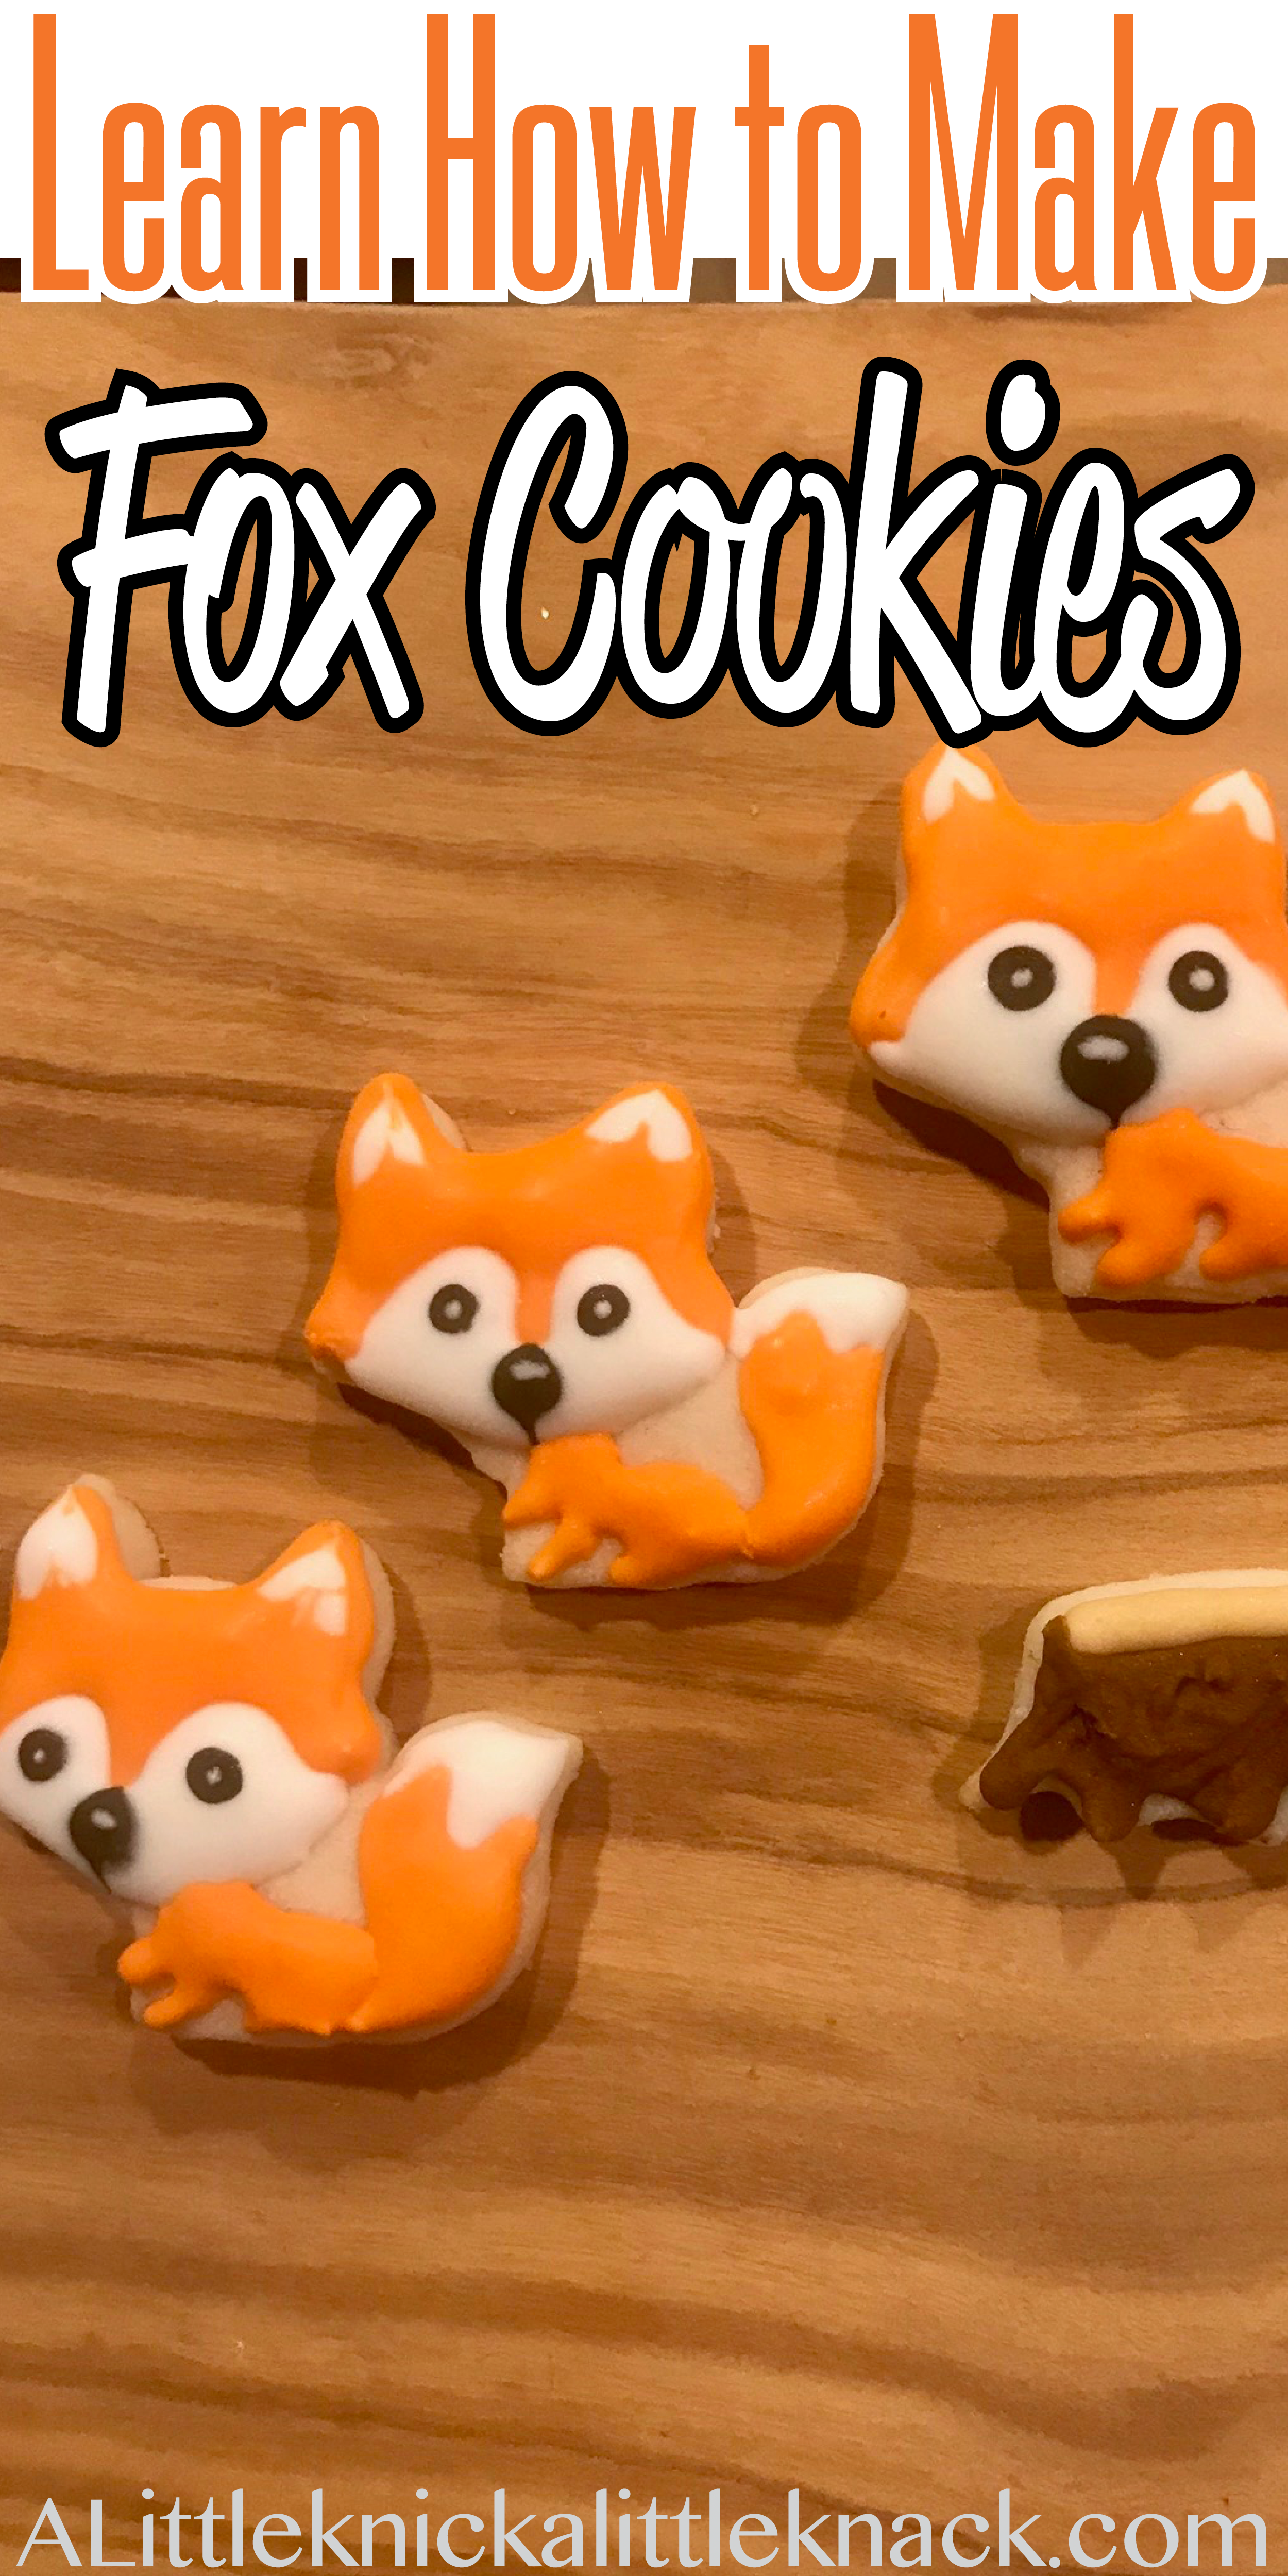 Learn how to make adorable fox cookies using royal icing that are almost too cute to eat. #royalicing